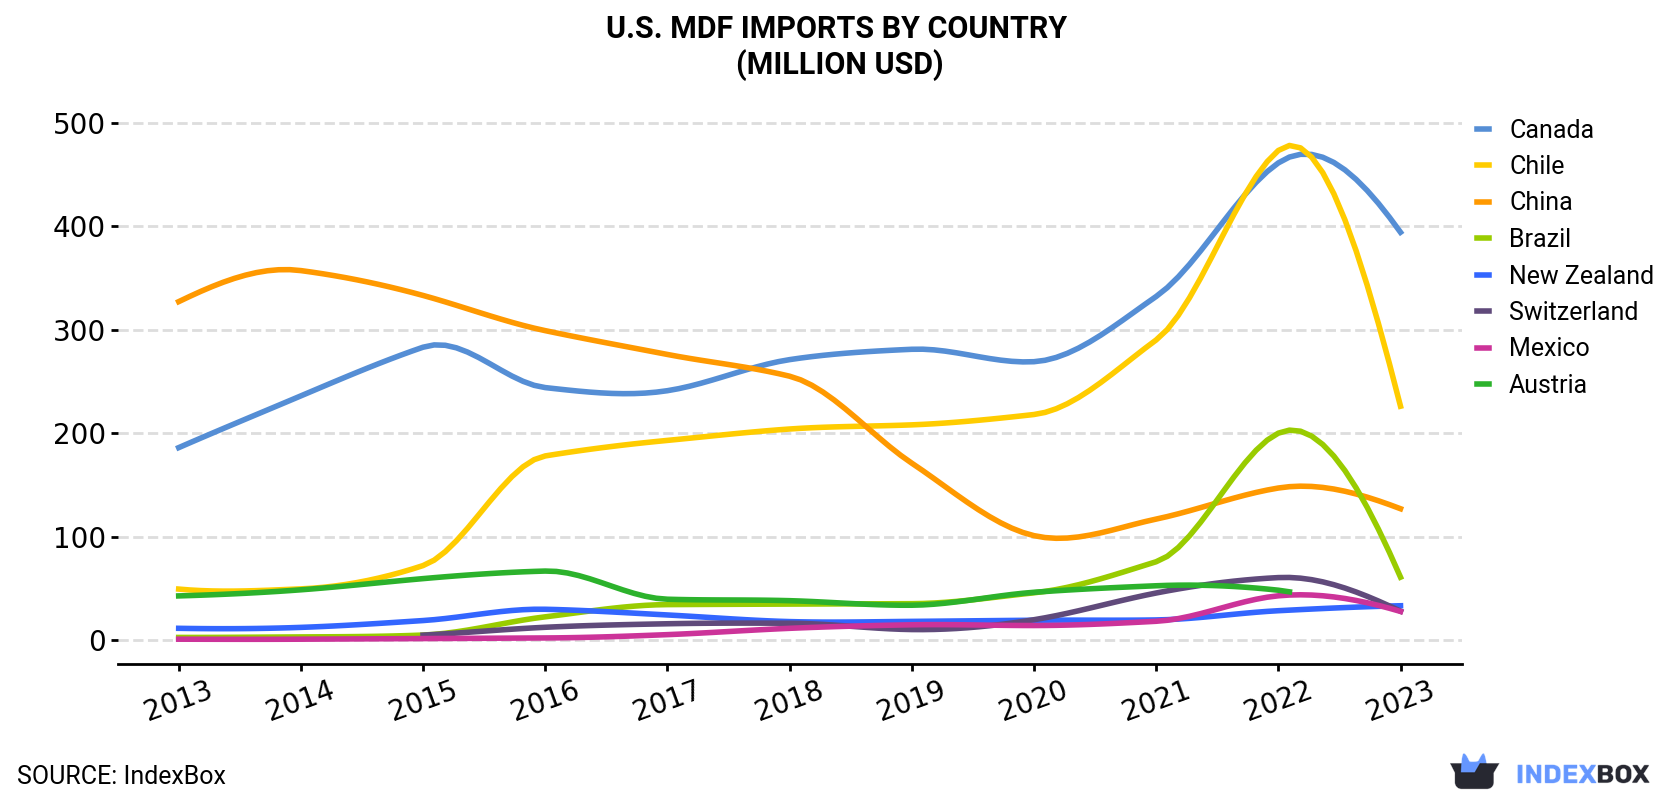 U.S. MDF Imports By Country (Million USD)